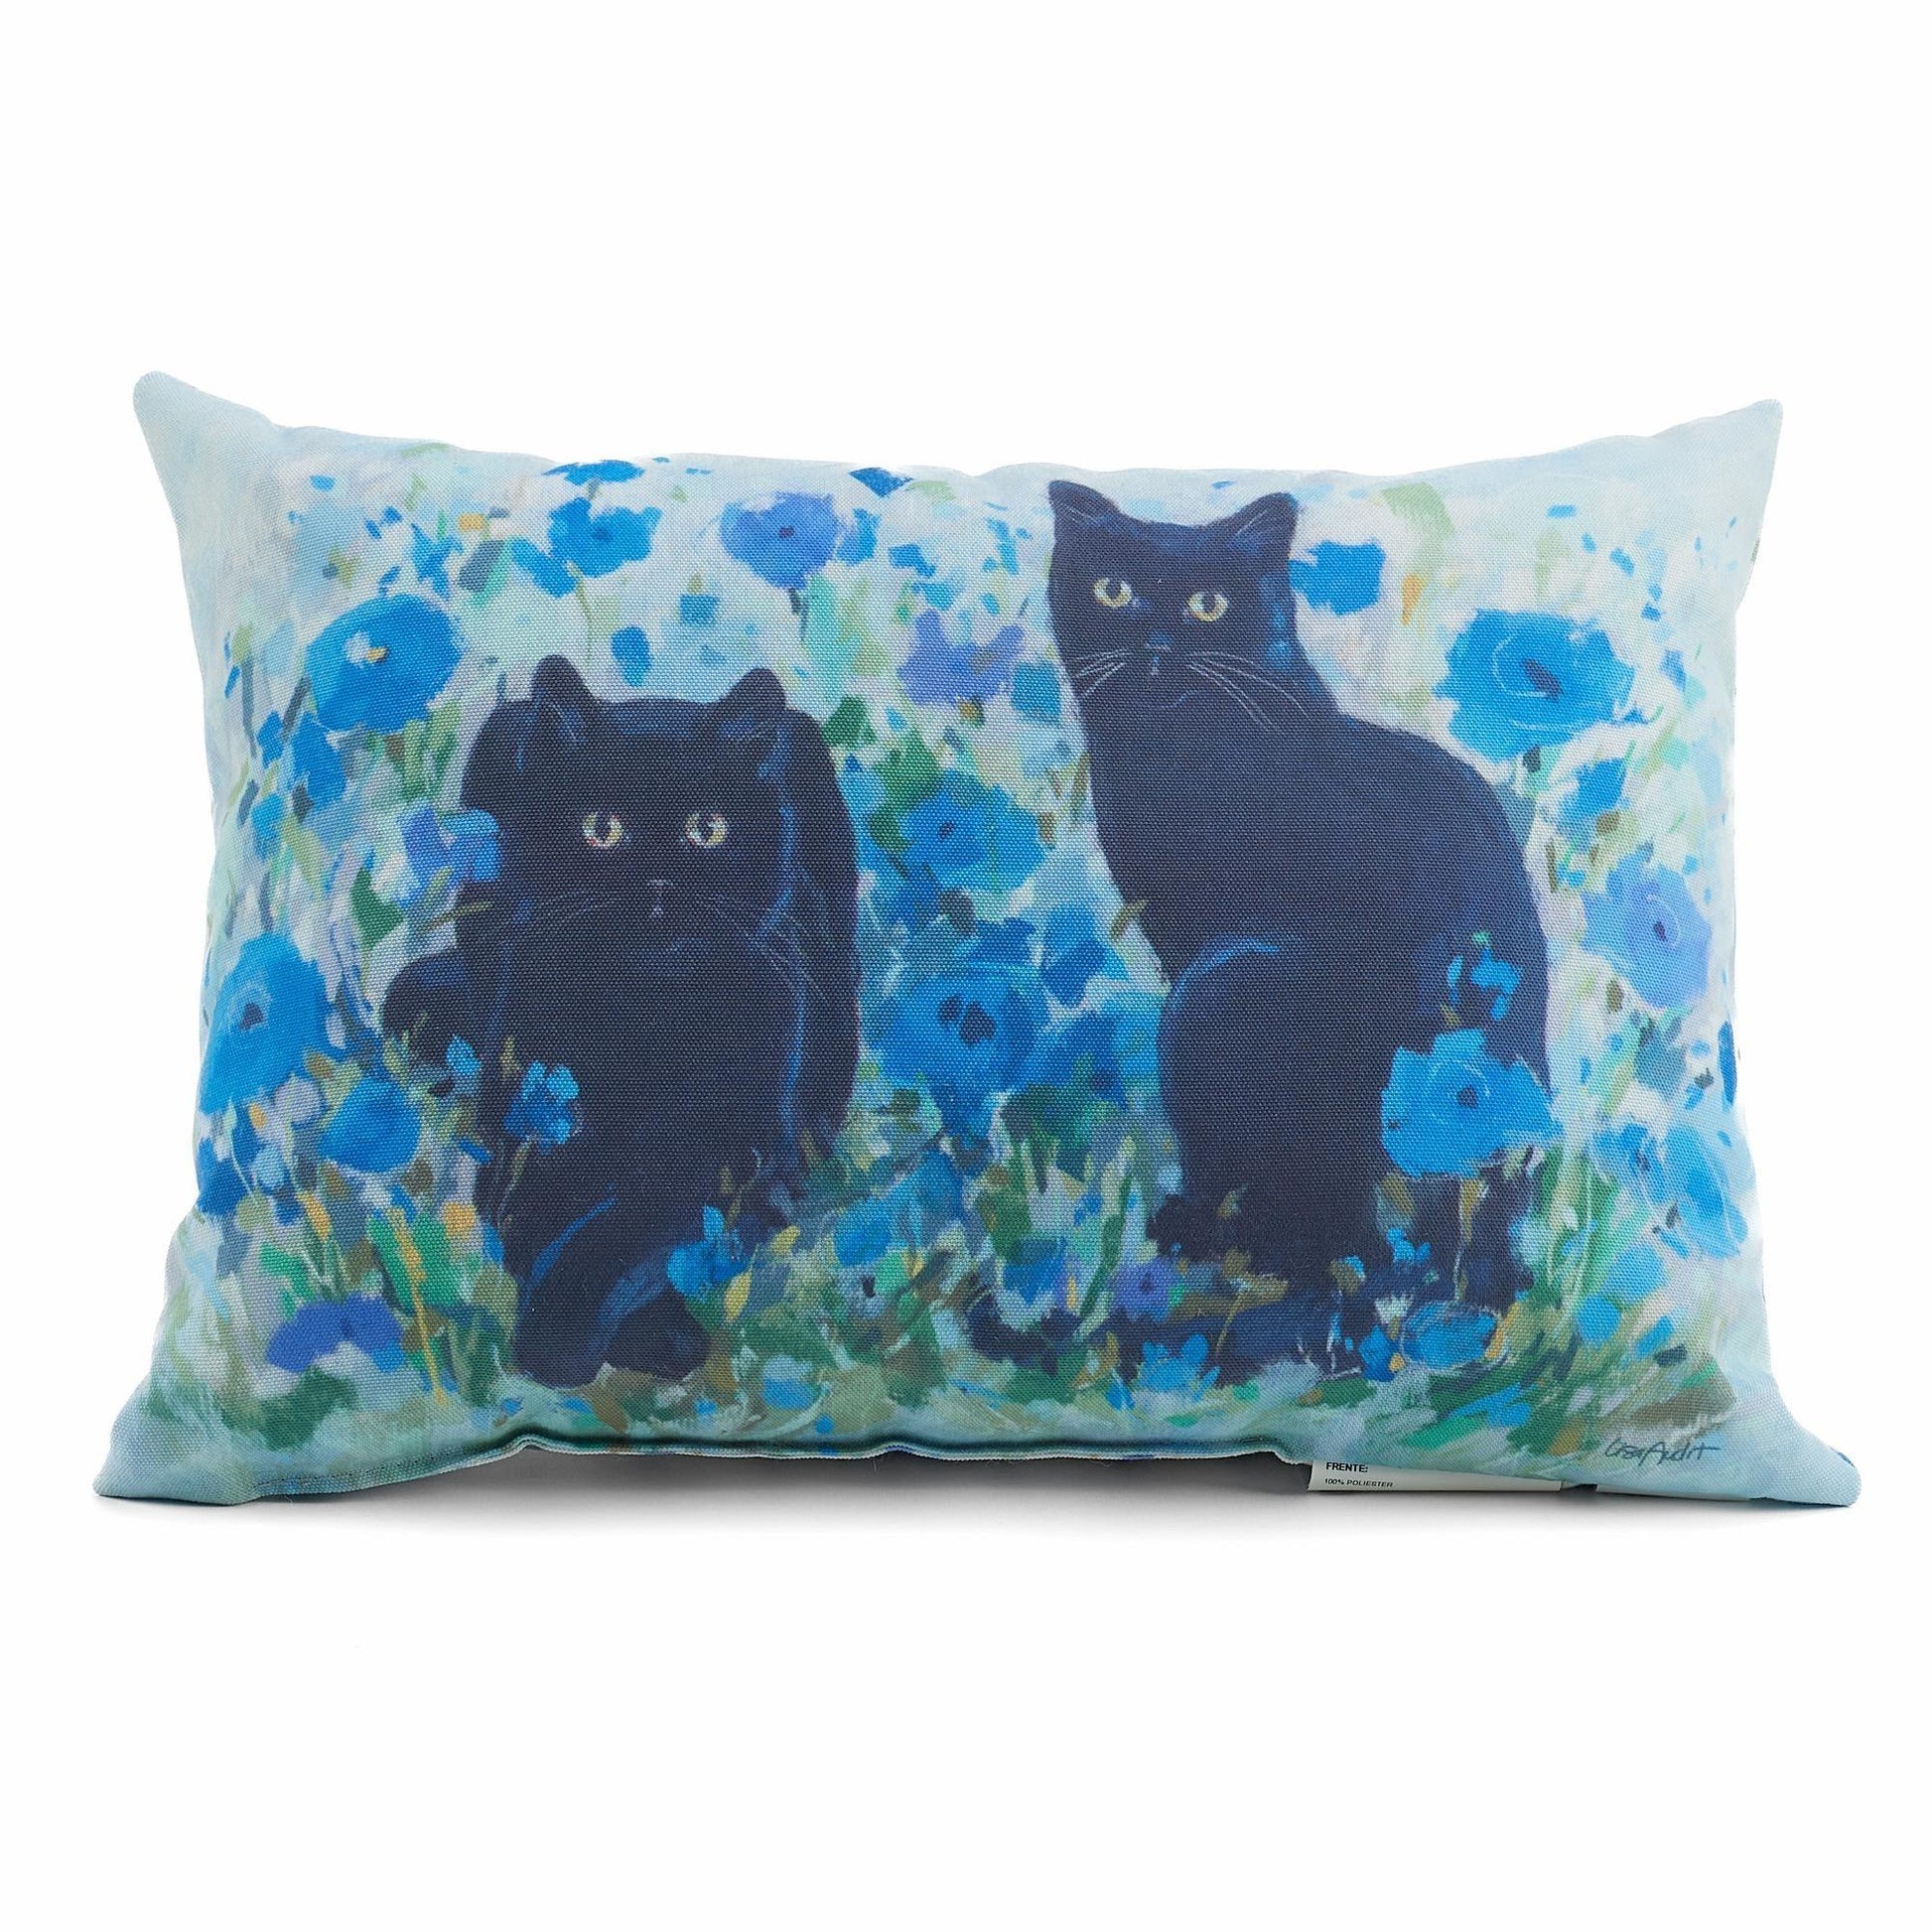 Cats in Bloom—Black Cat Decorative Pillow - Wild Wings